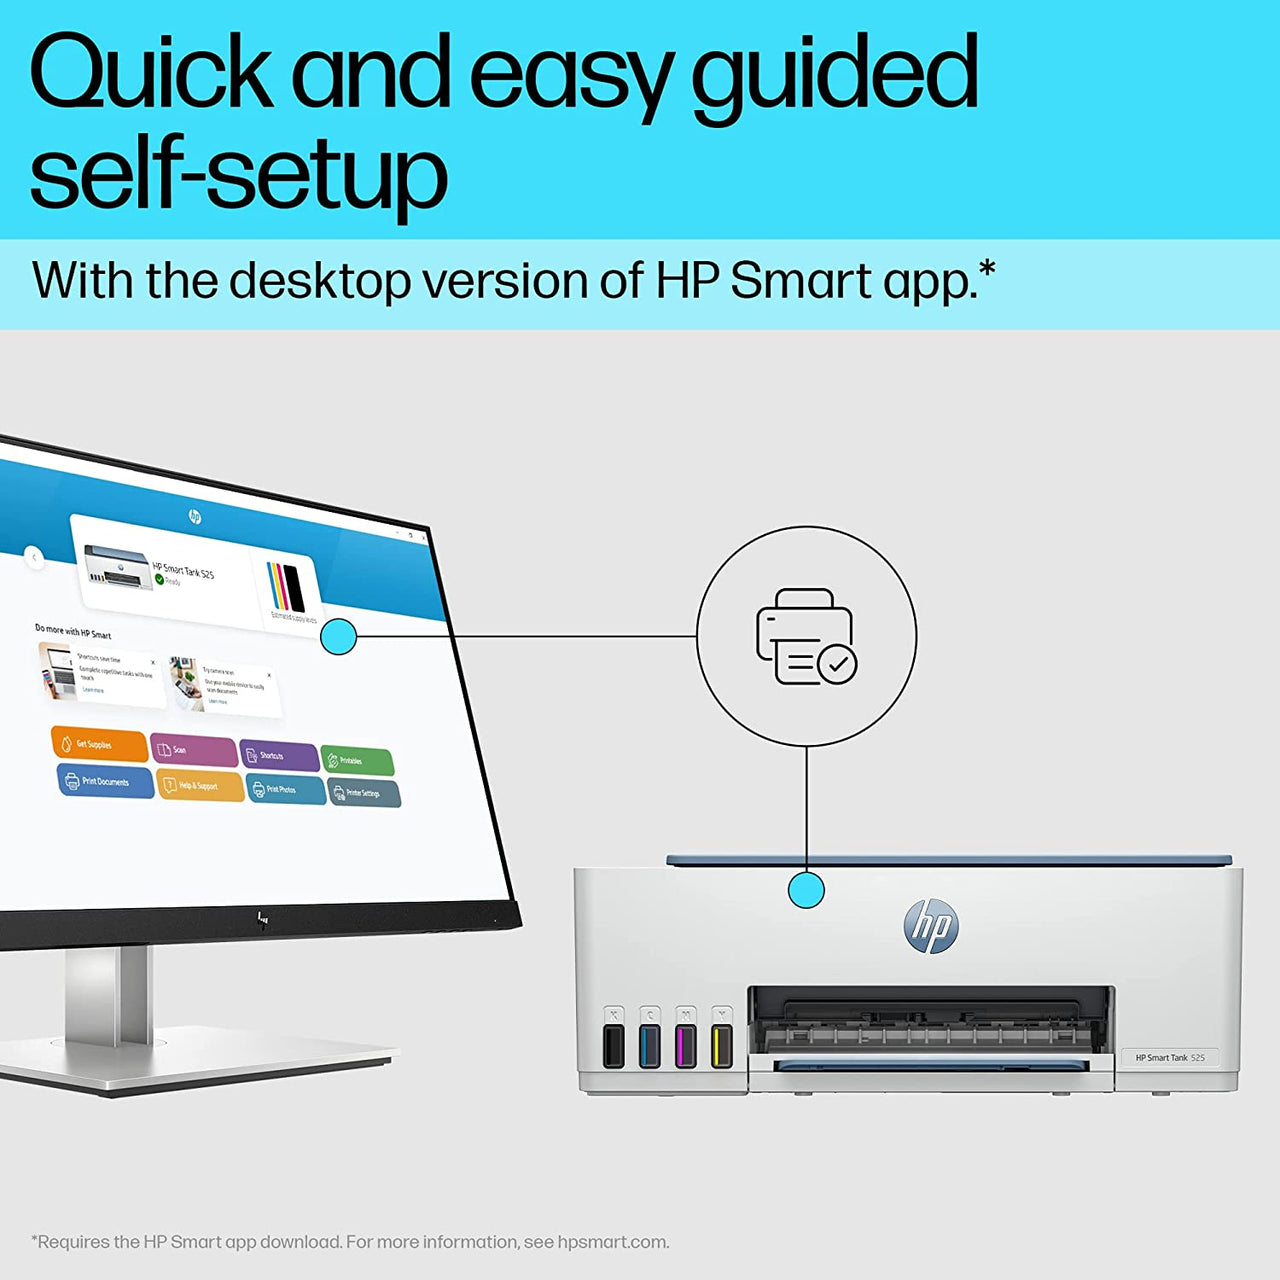 Hp Smart Tank 525 All In One Printer